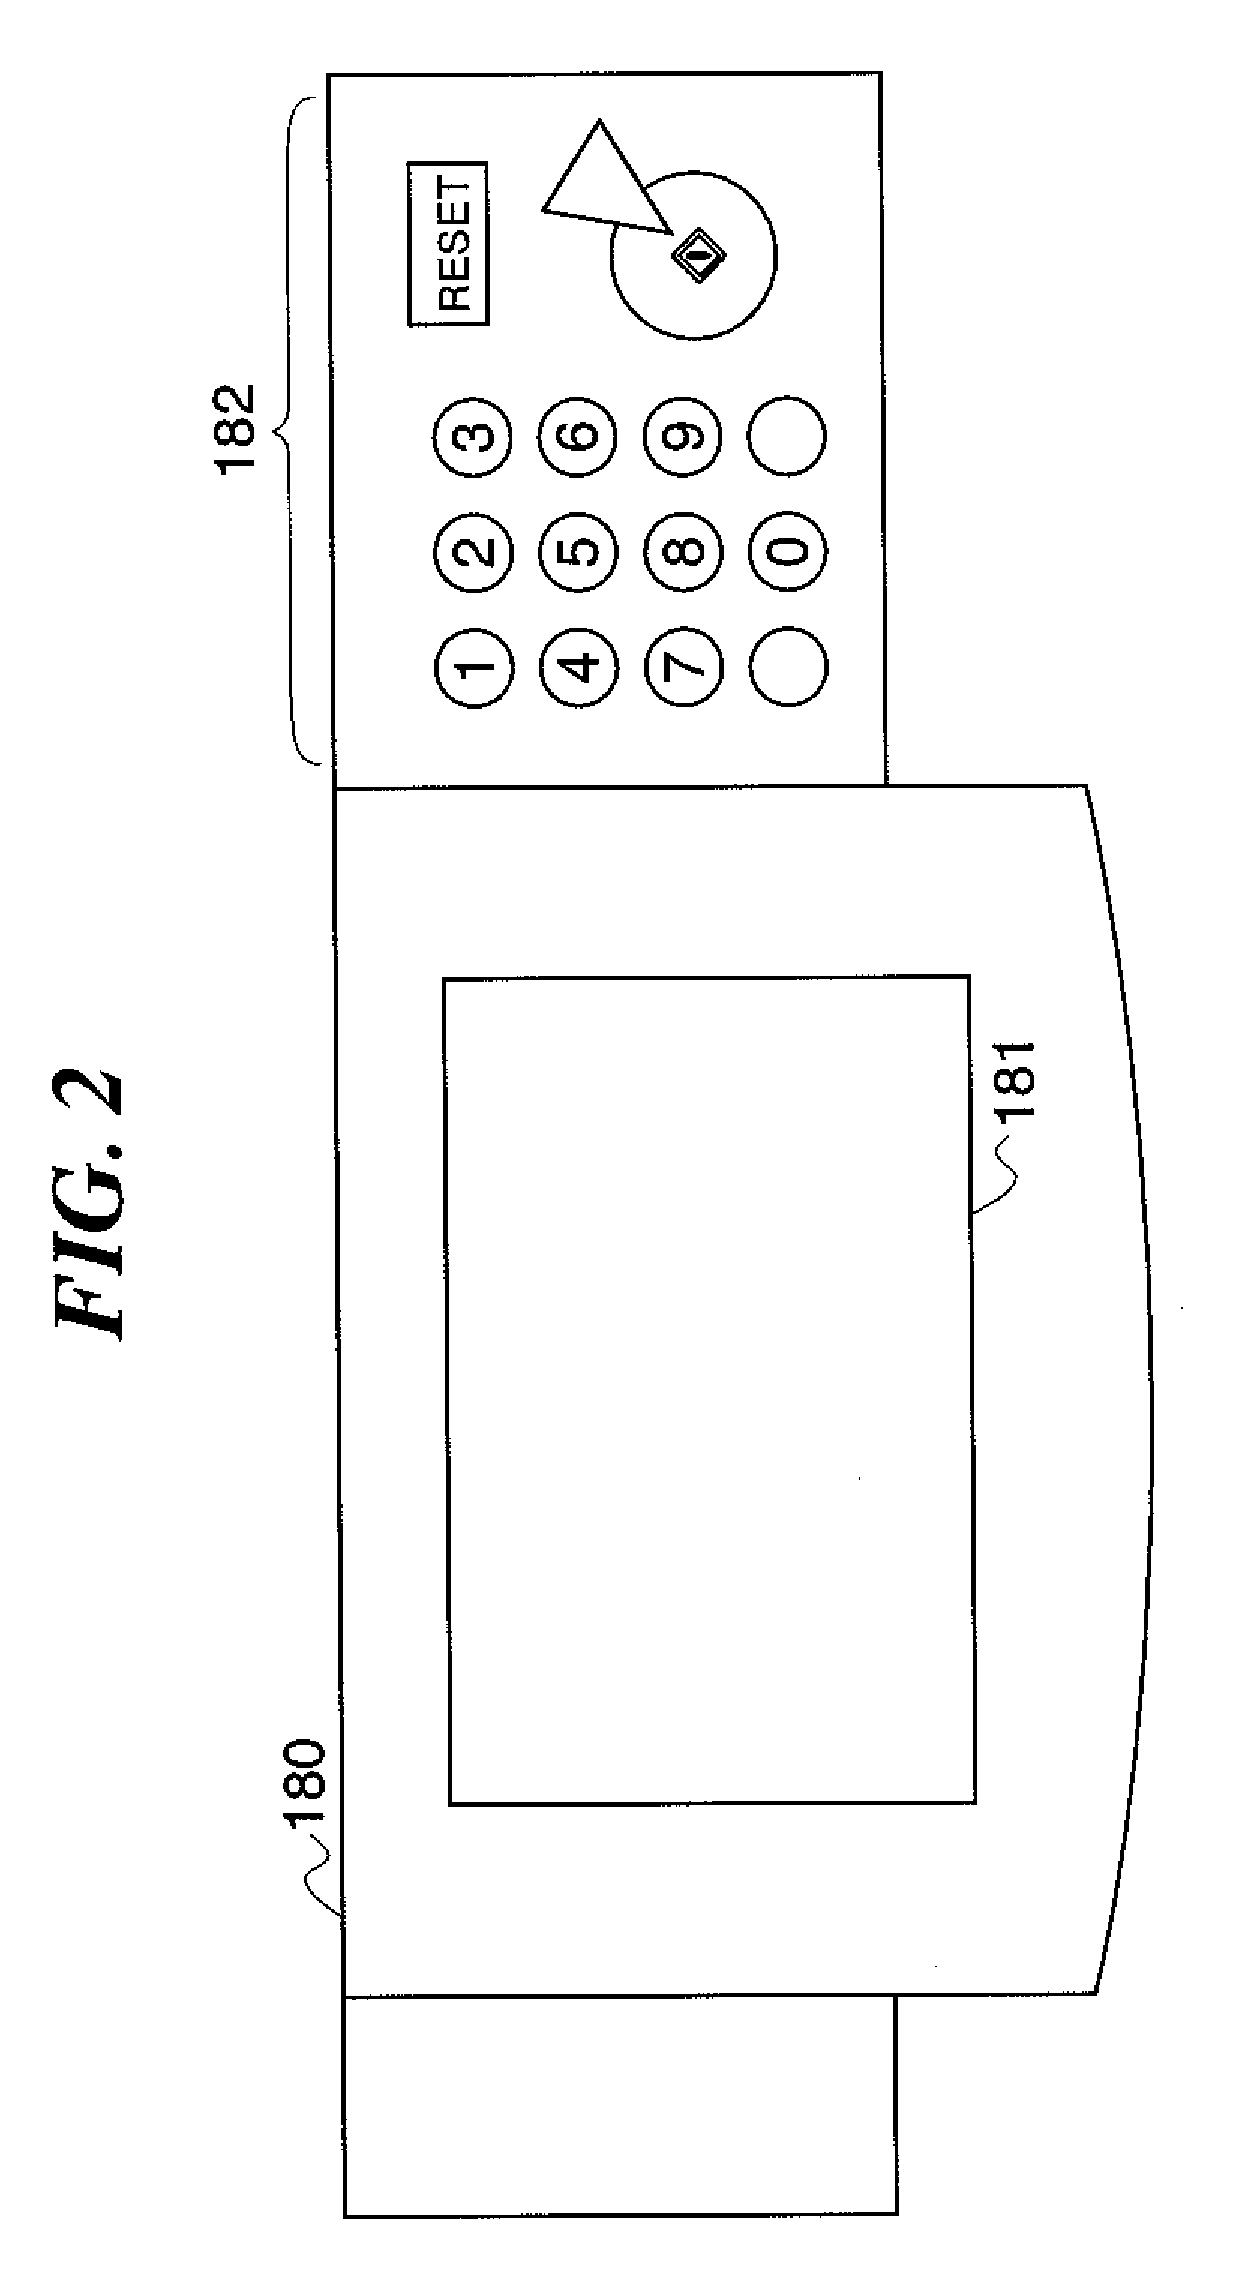 File system, data processing apparatus, file reference method, and storage medium